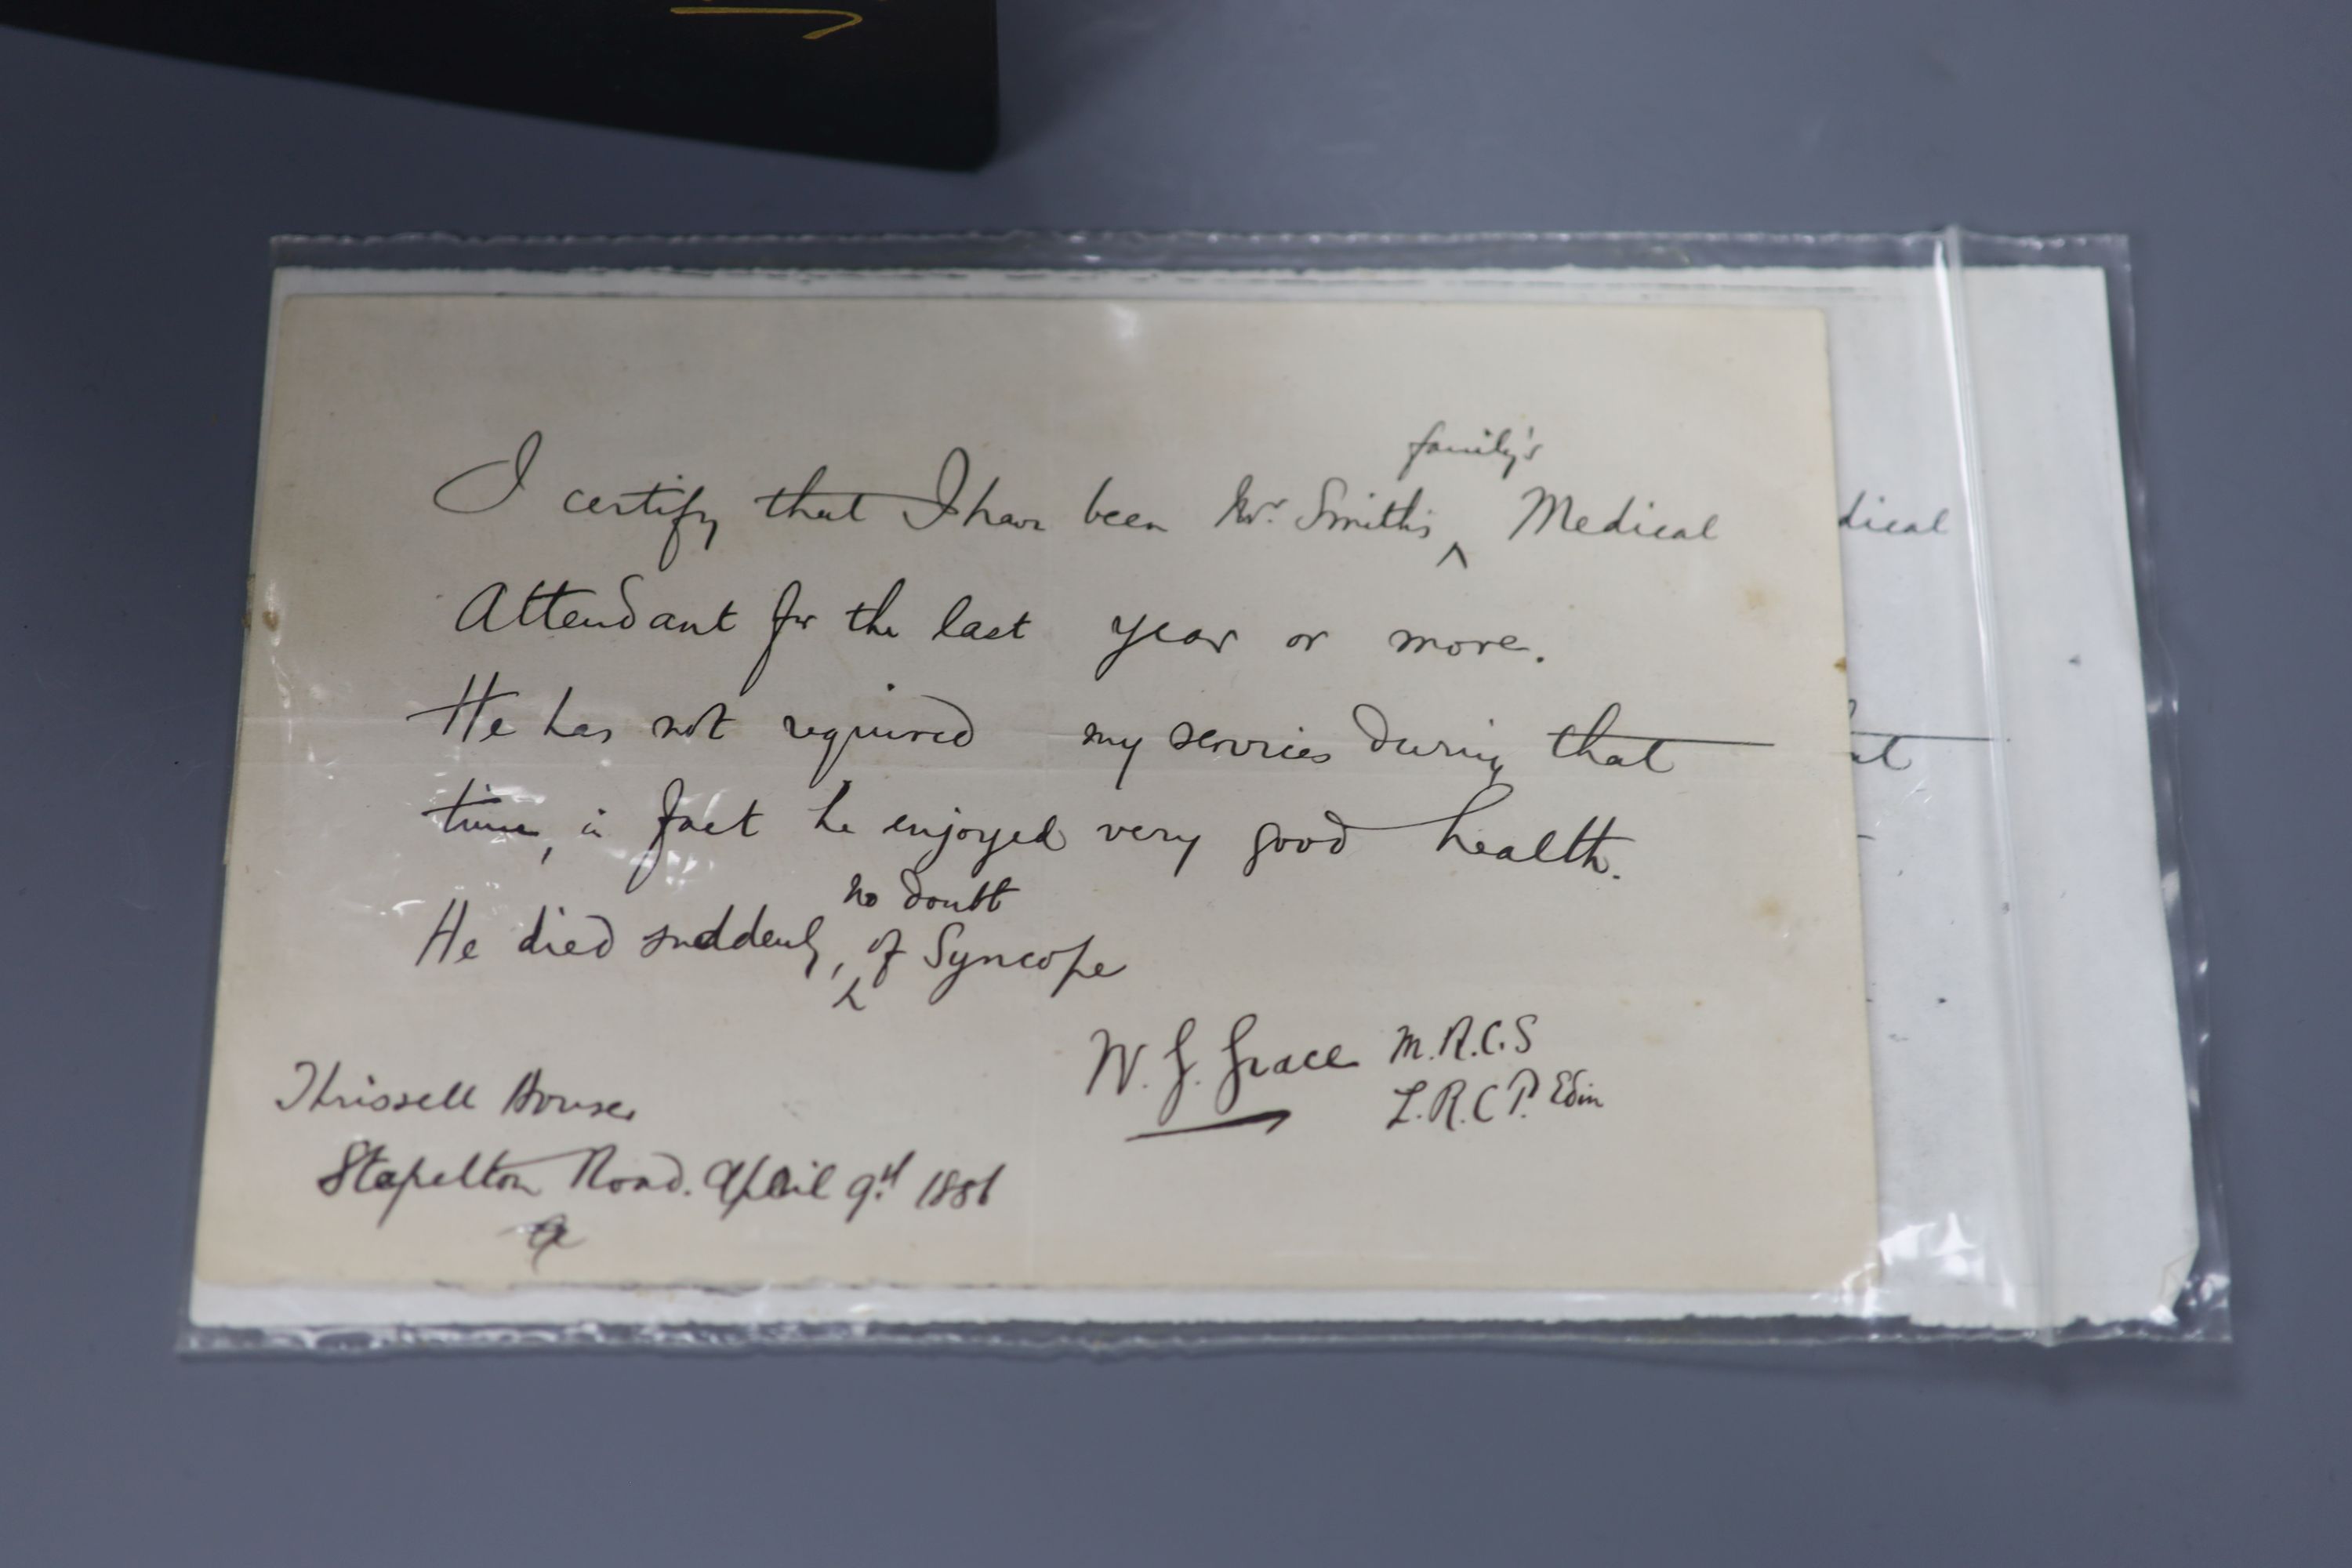 A letter written by W.G. Grace,with a copy of his book, Cricket, 1891